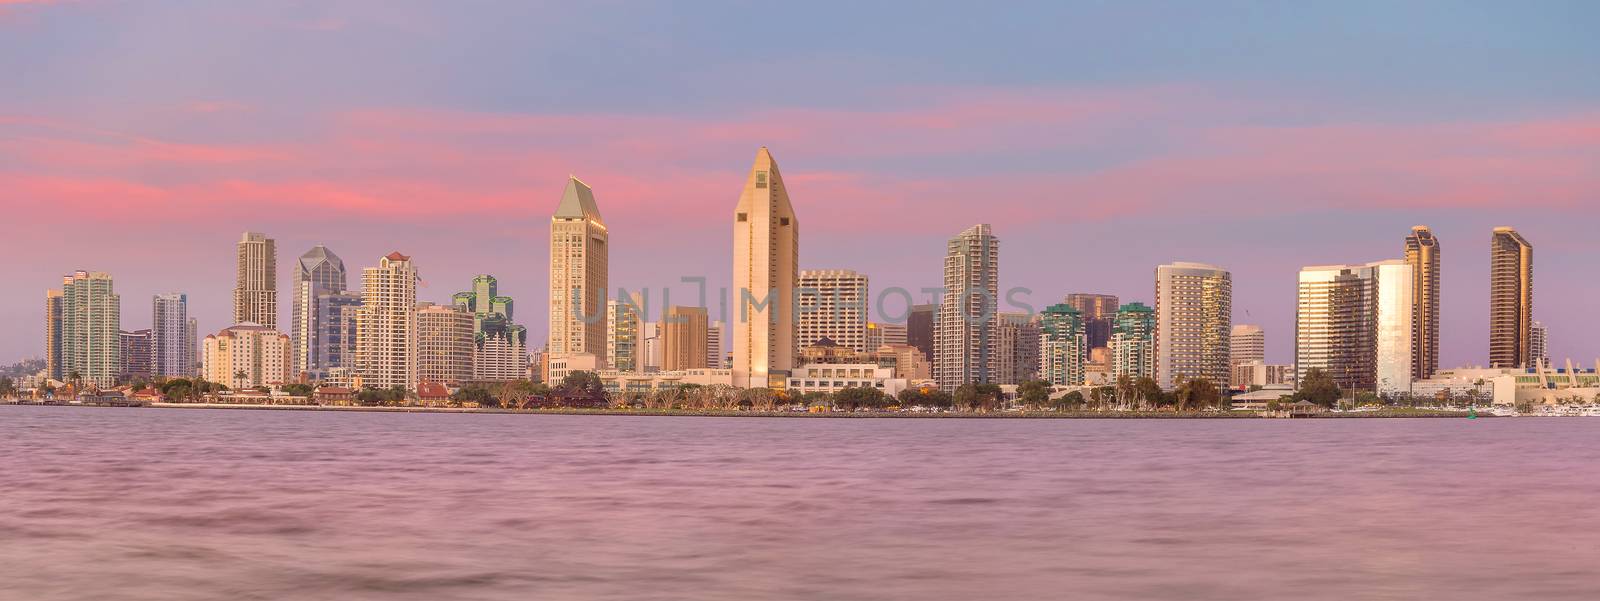 San Diego skyline at sunset by f11photo